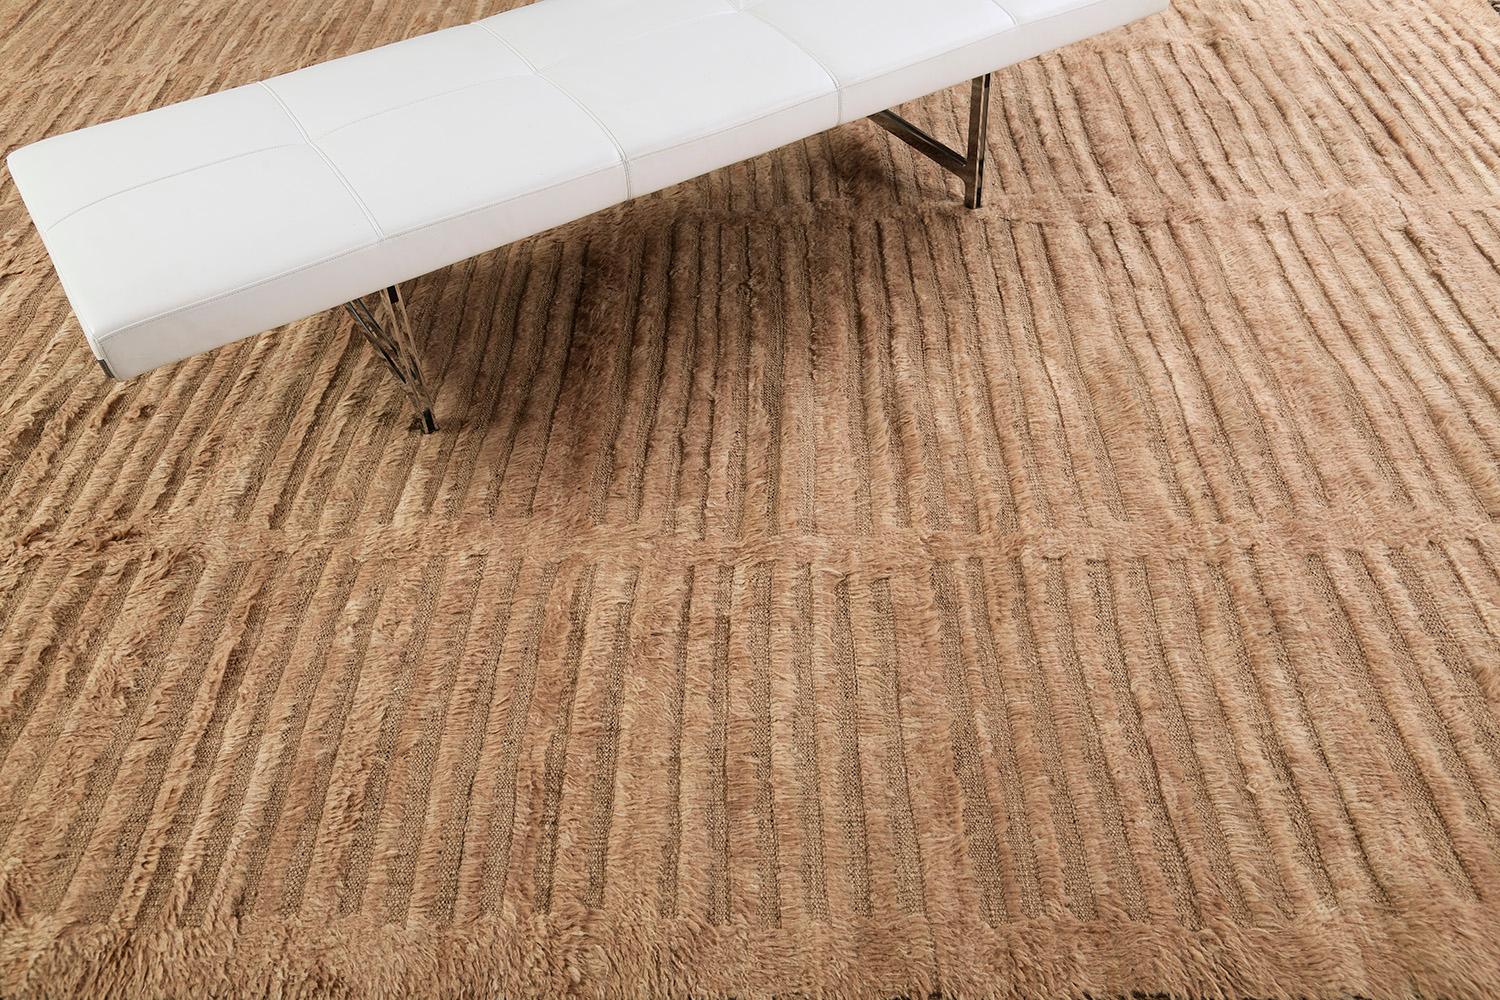 Beshabar is a gorgeous home decor that features a flat tone that can complement other furniture. Through its simplicity and stunning embossed details, it plays an integral part in adorning the rug's overall elegant appearance. The Haute Bohemian